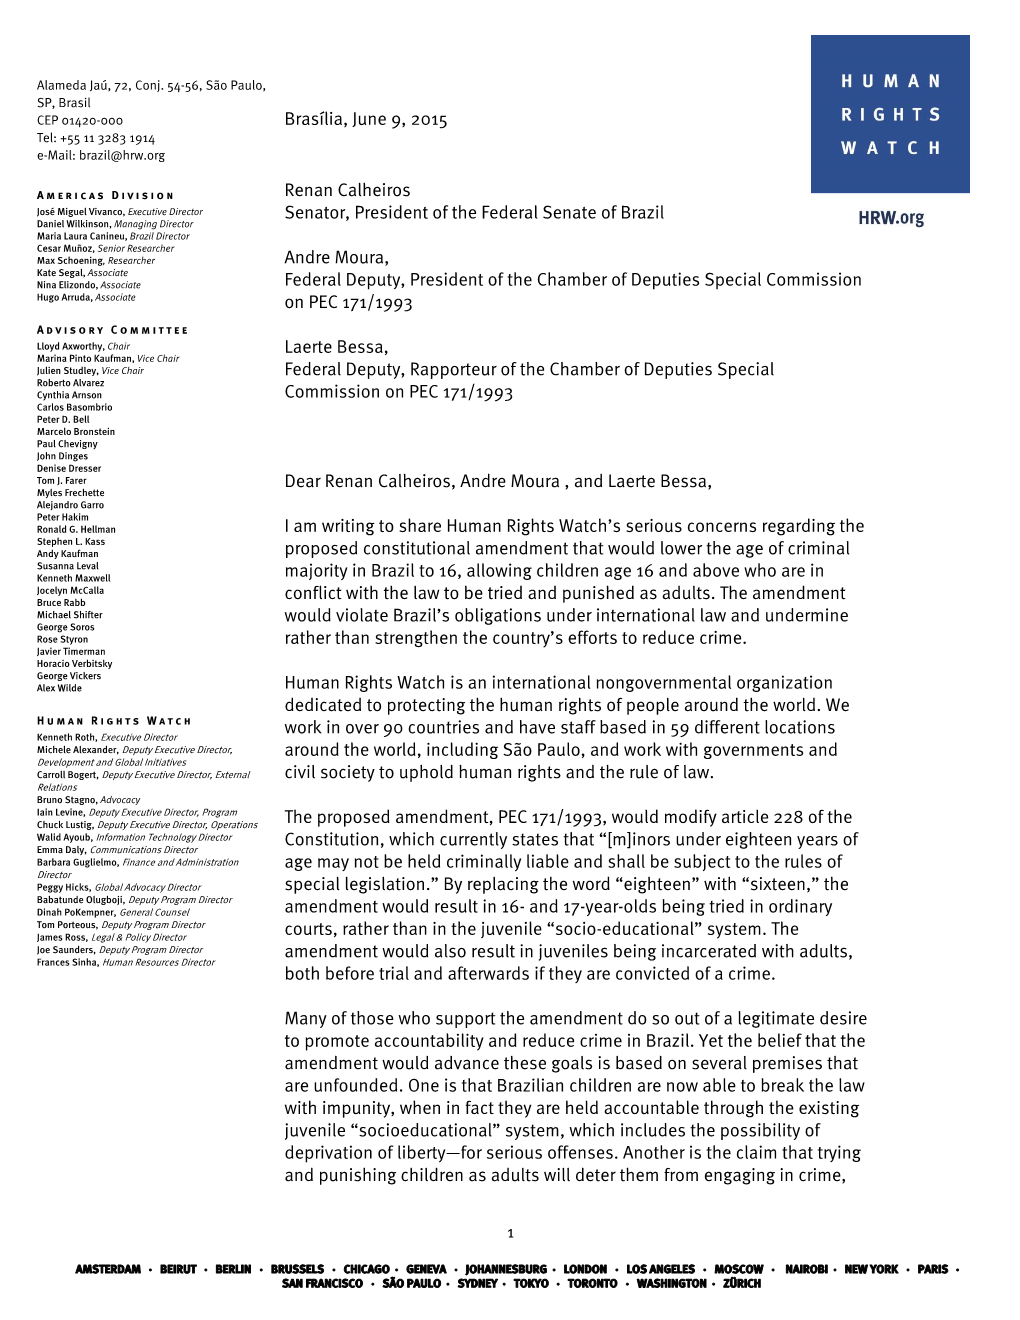 Download Letter to Congressional Leaders on PEC 171/1993